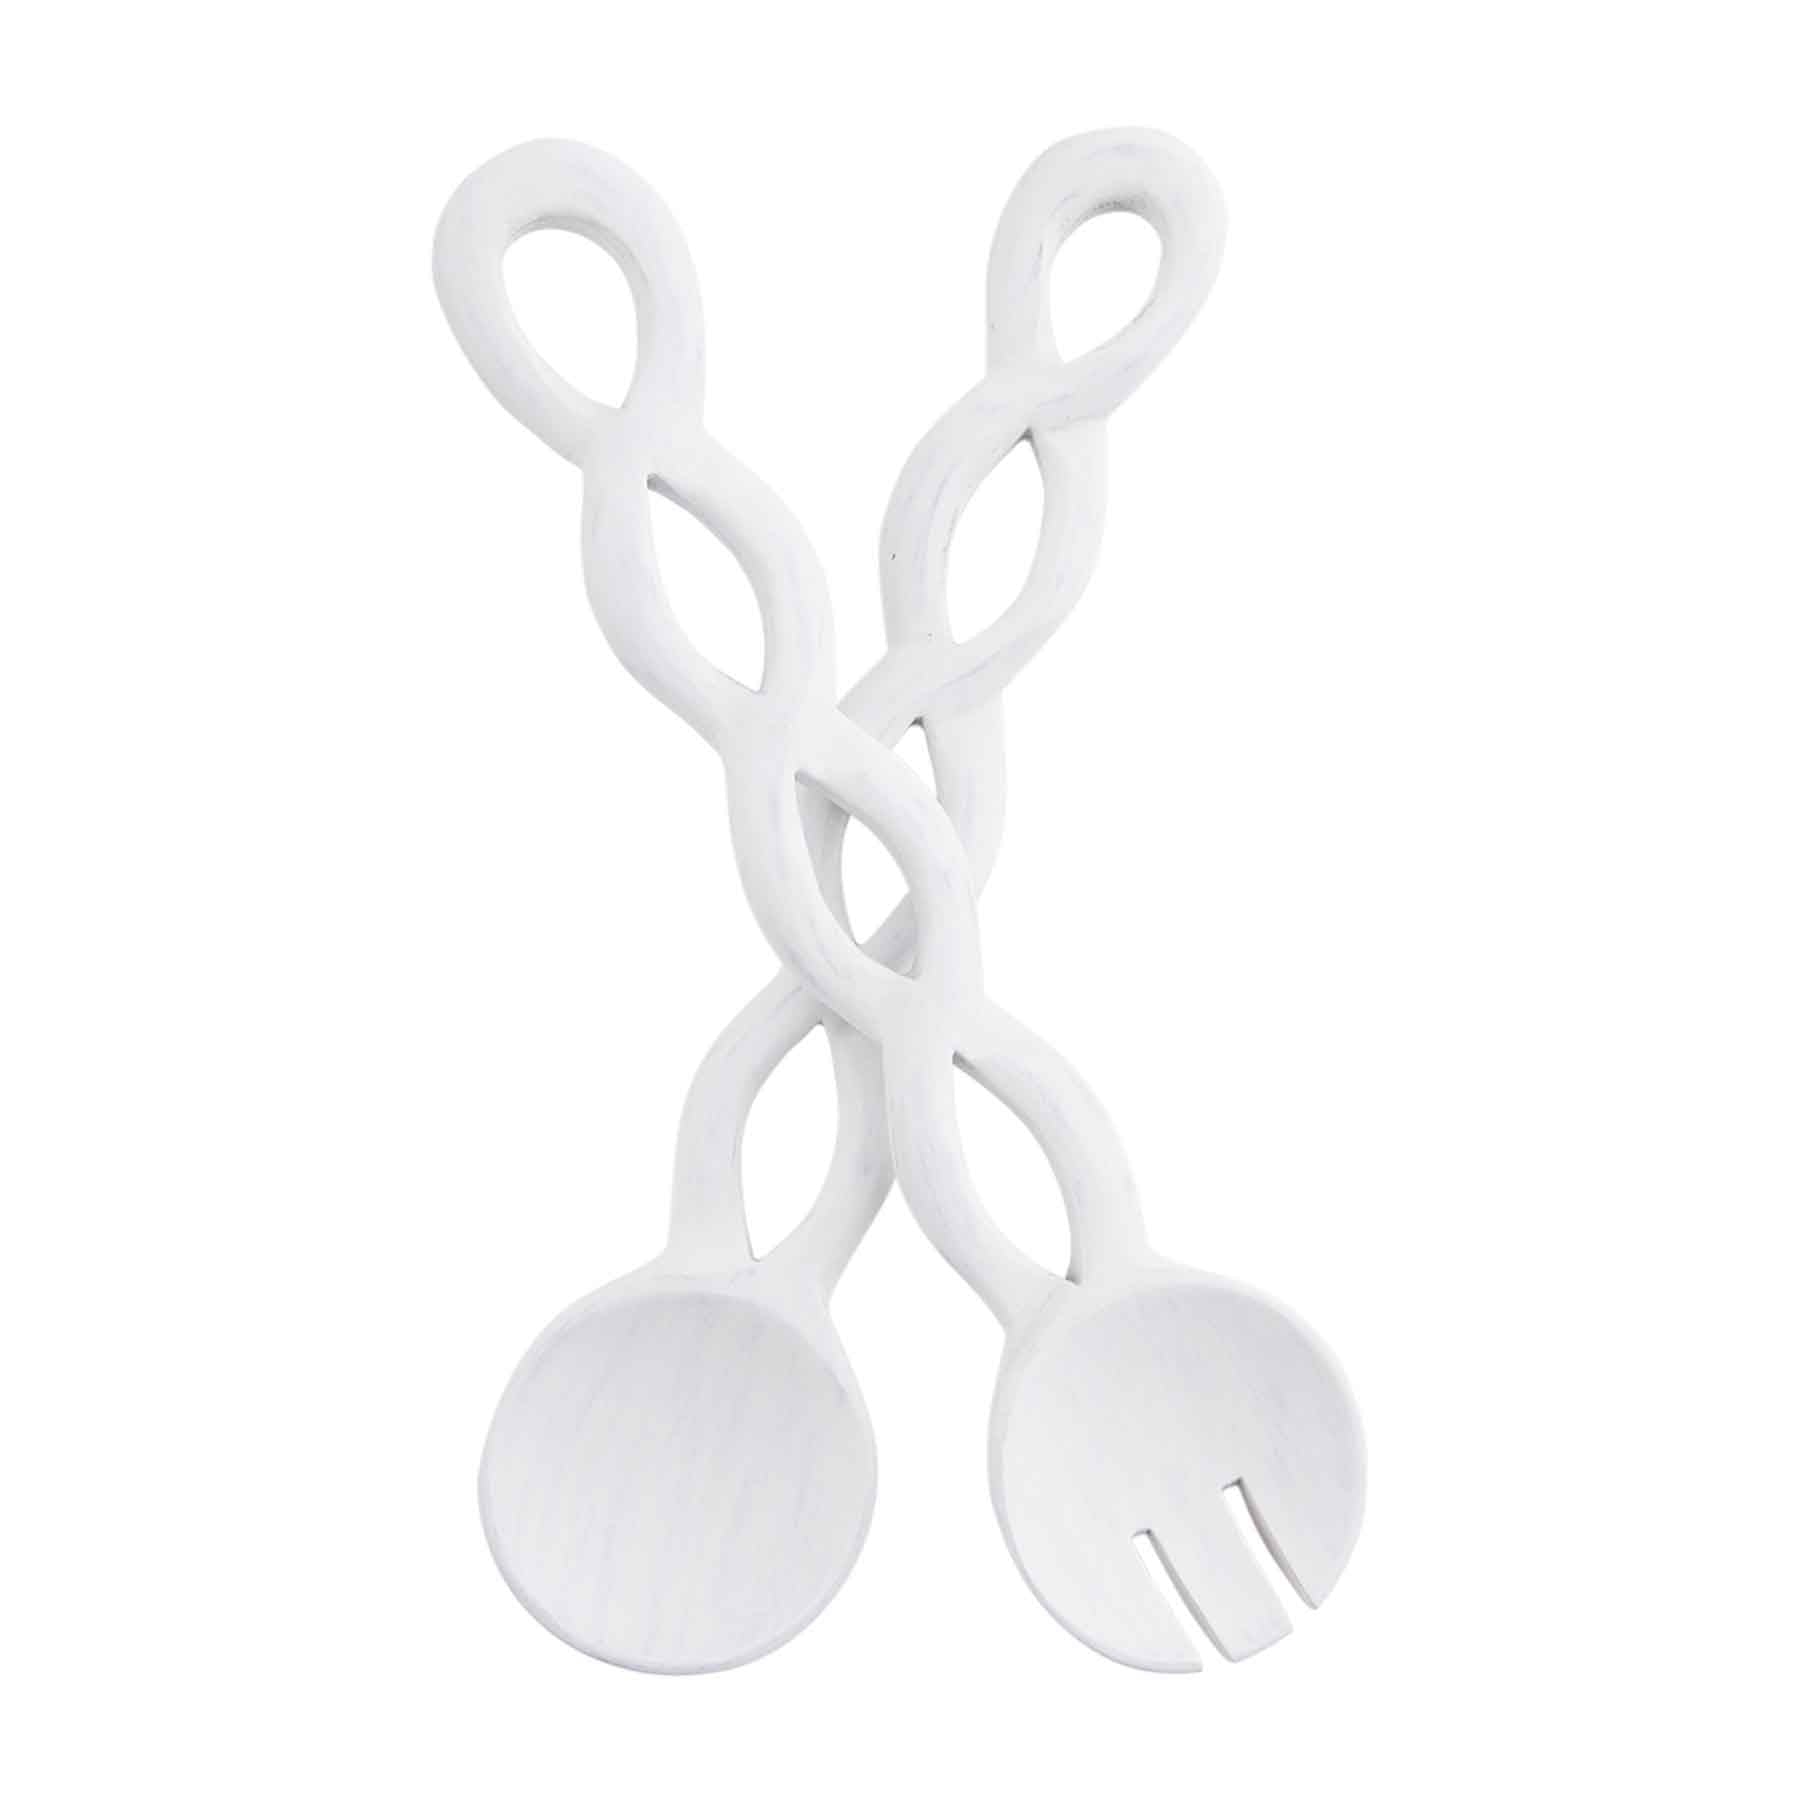 White Twisted Wood Serving Set